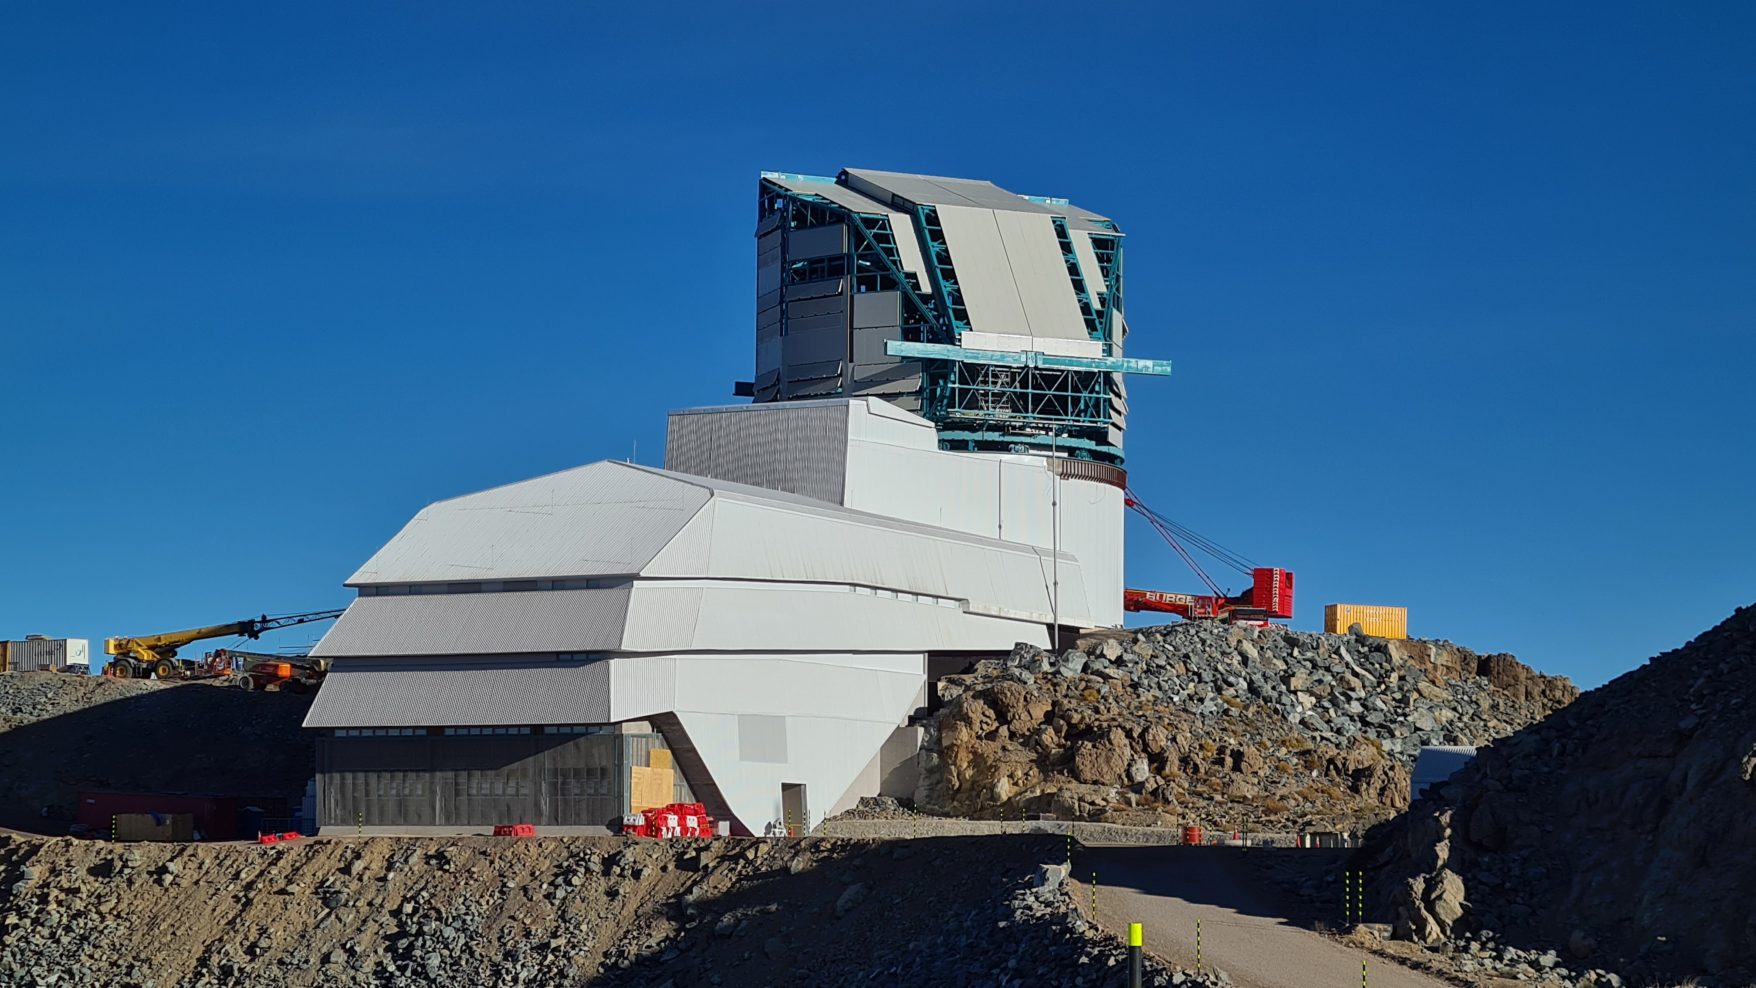 Photograph of the LSST Summit during construction in Chile